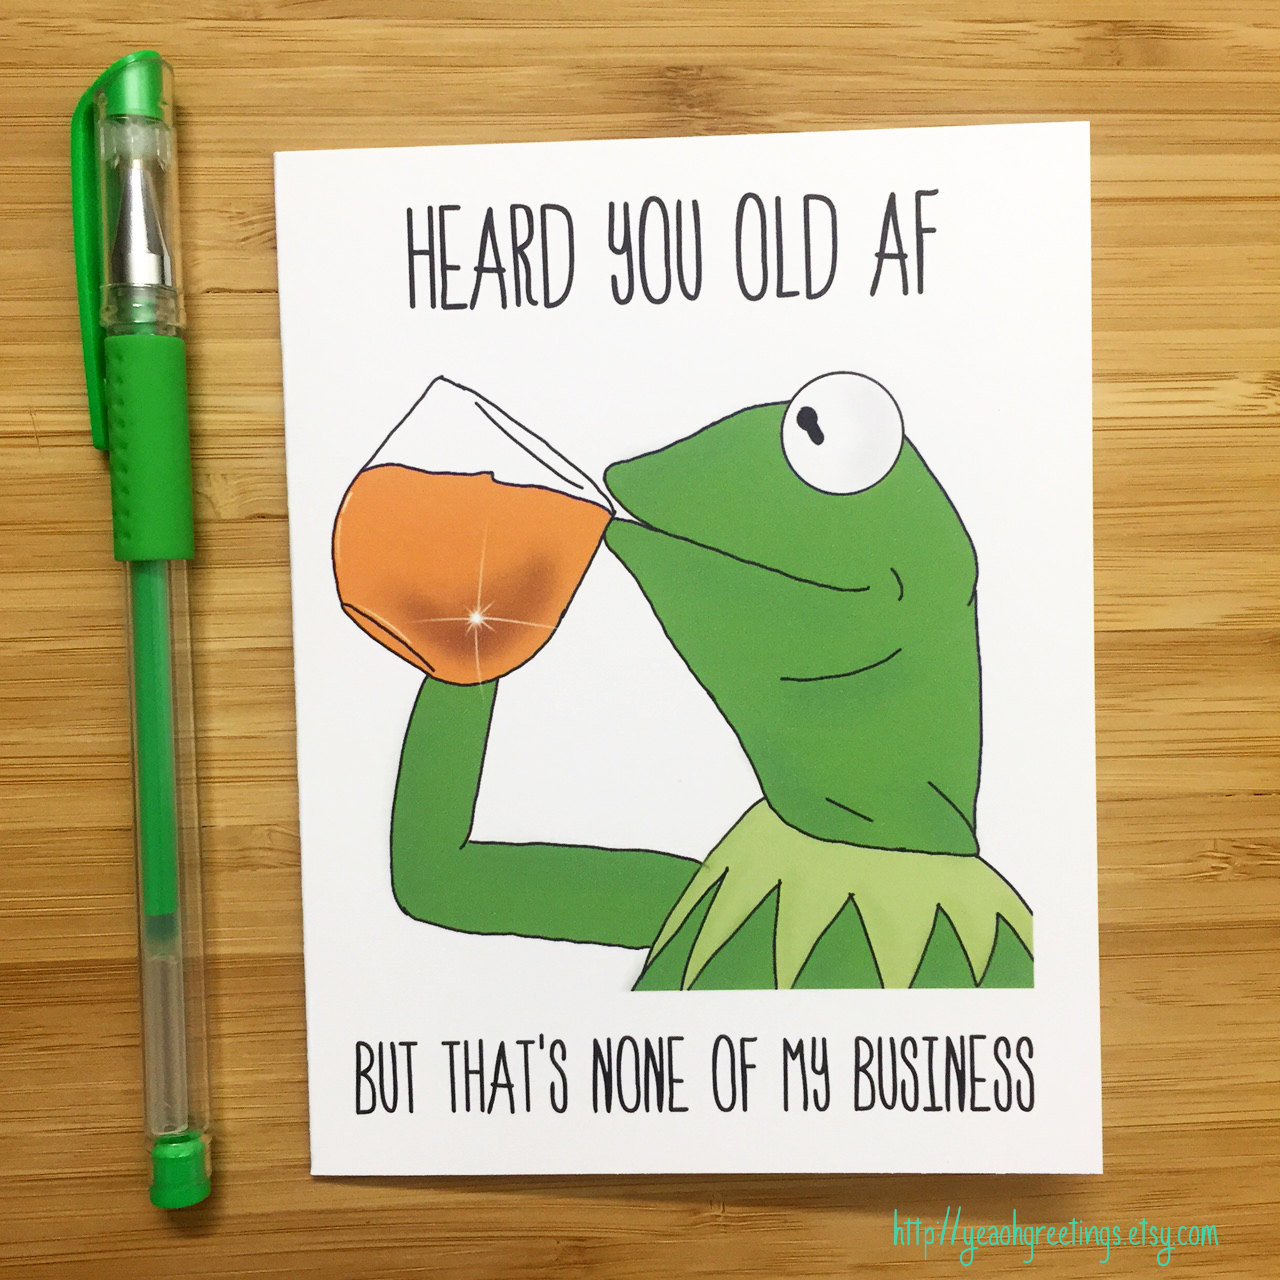 Funny Adult Birthday Cards
 Funny Birthday Cards We Need Fun